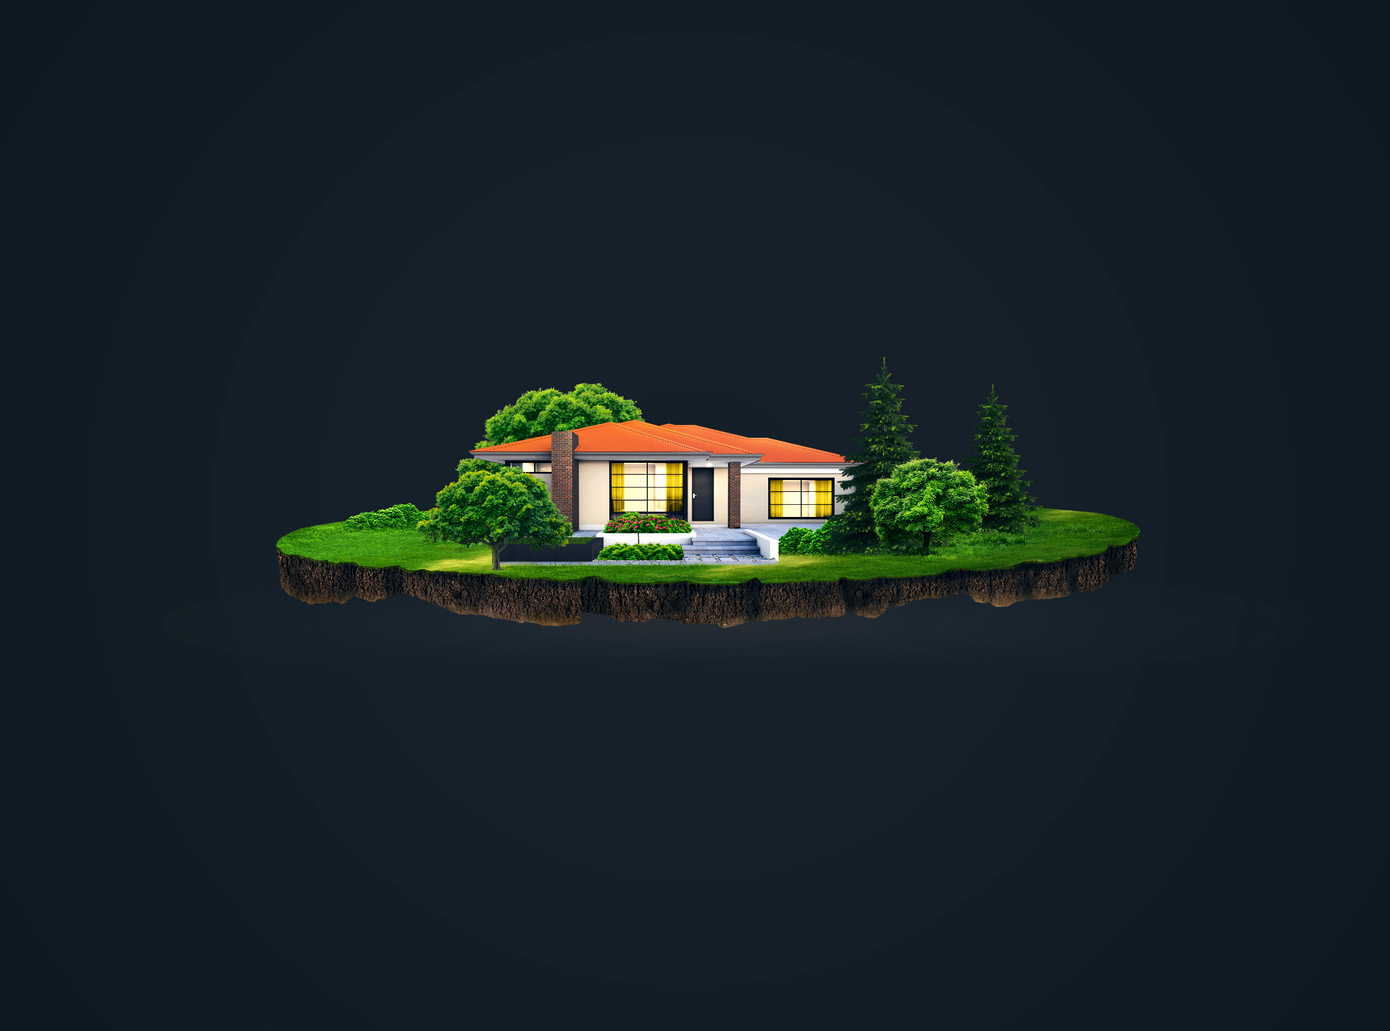 Image of a nice, quiet family house, sitting atop a plot of land, floating in space with nothing around it.